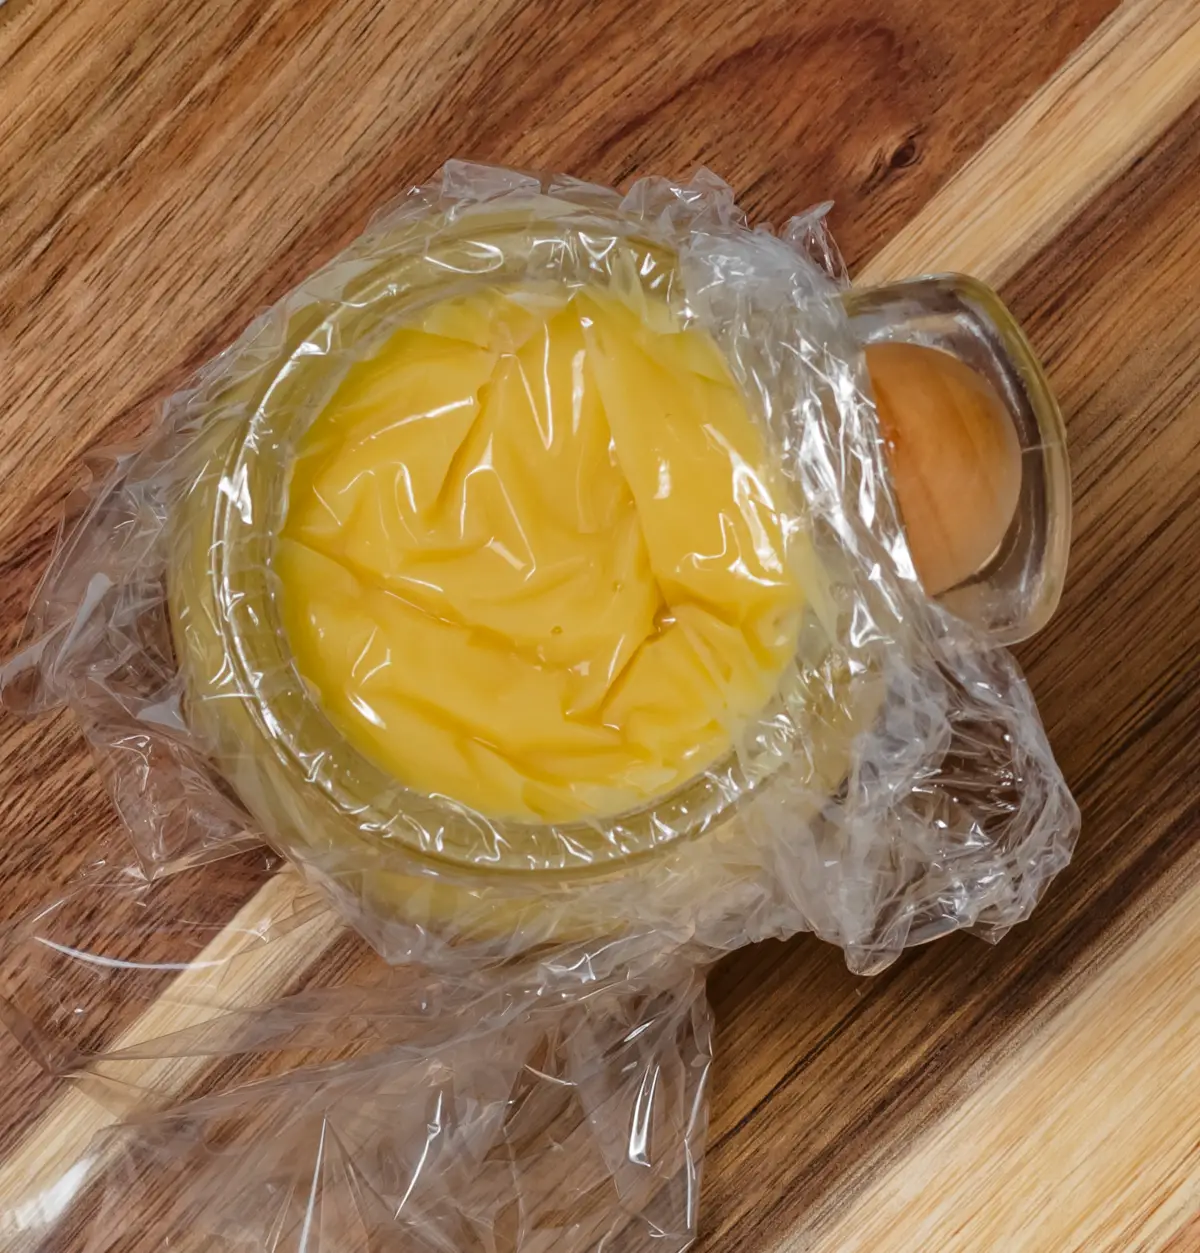 cover pastry cream with plastic wrap